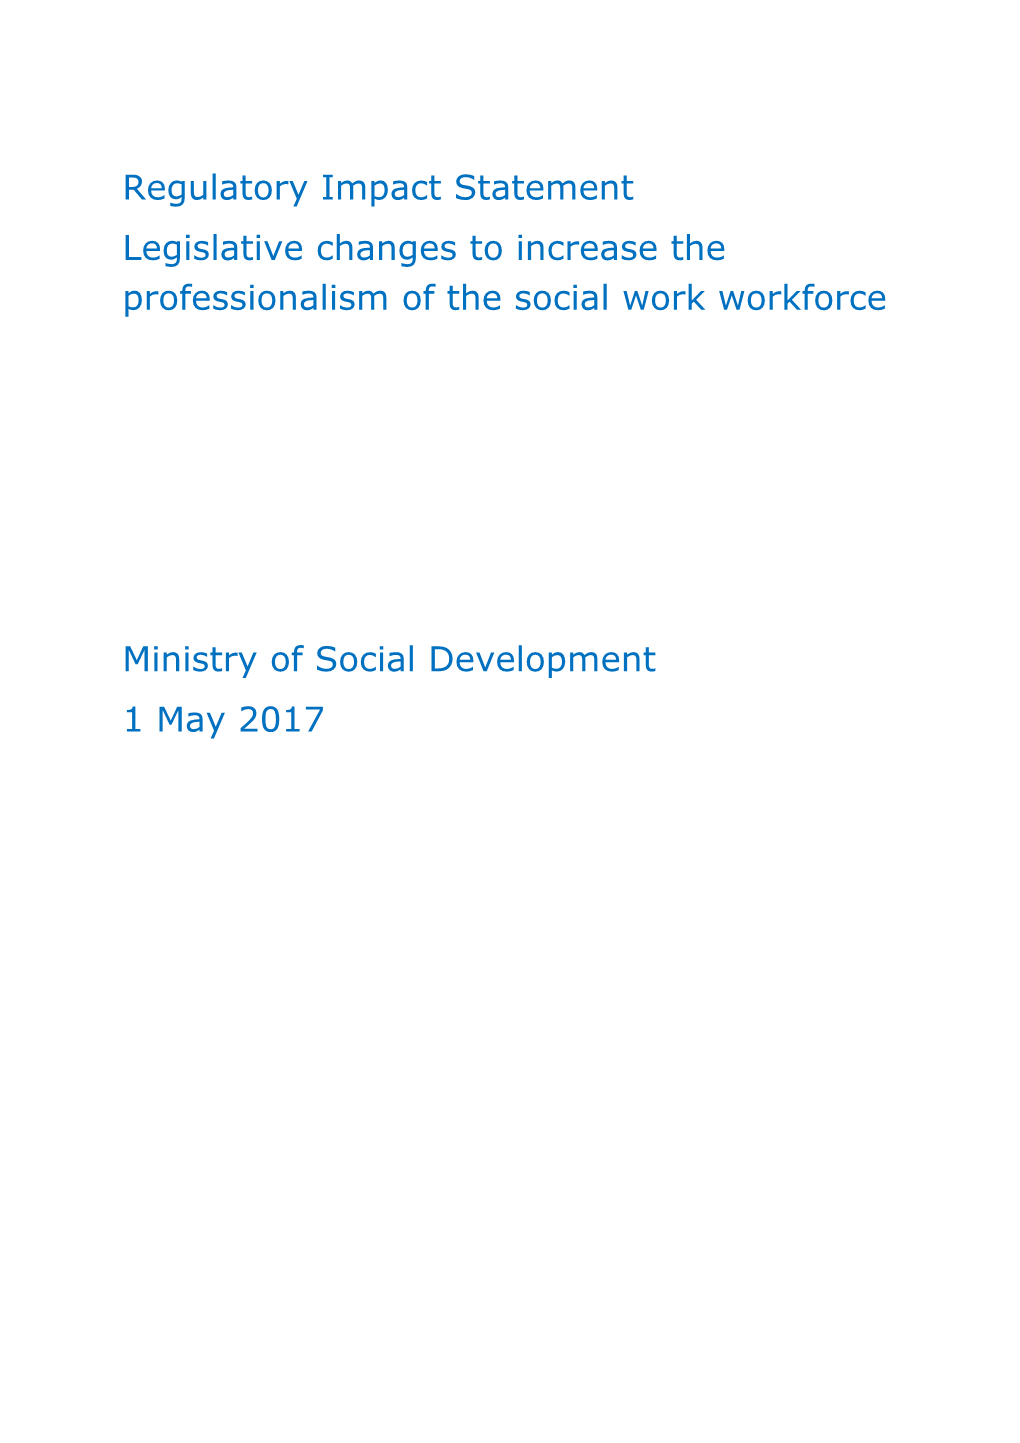 Legislative Changes to Increase the Professionalism of the Social Work Workforce